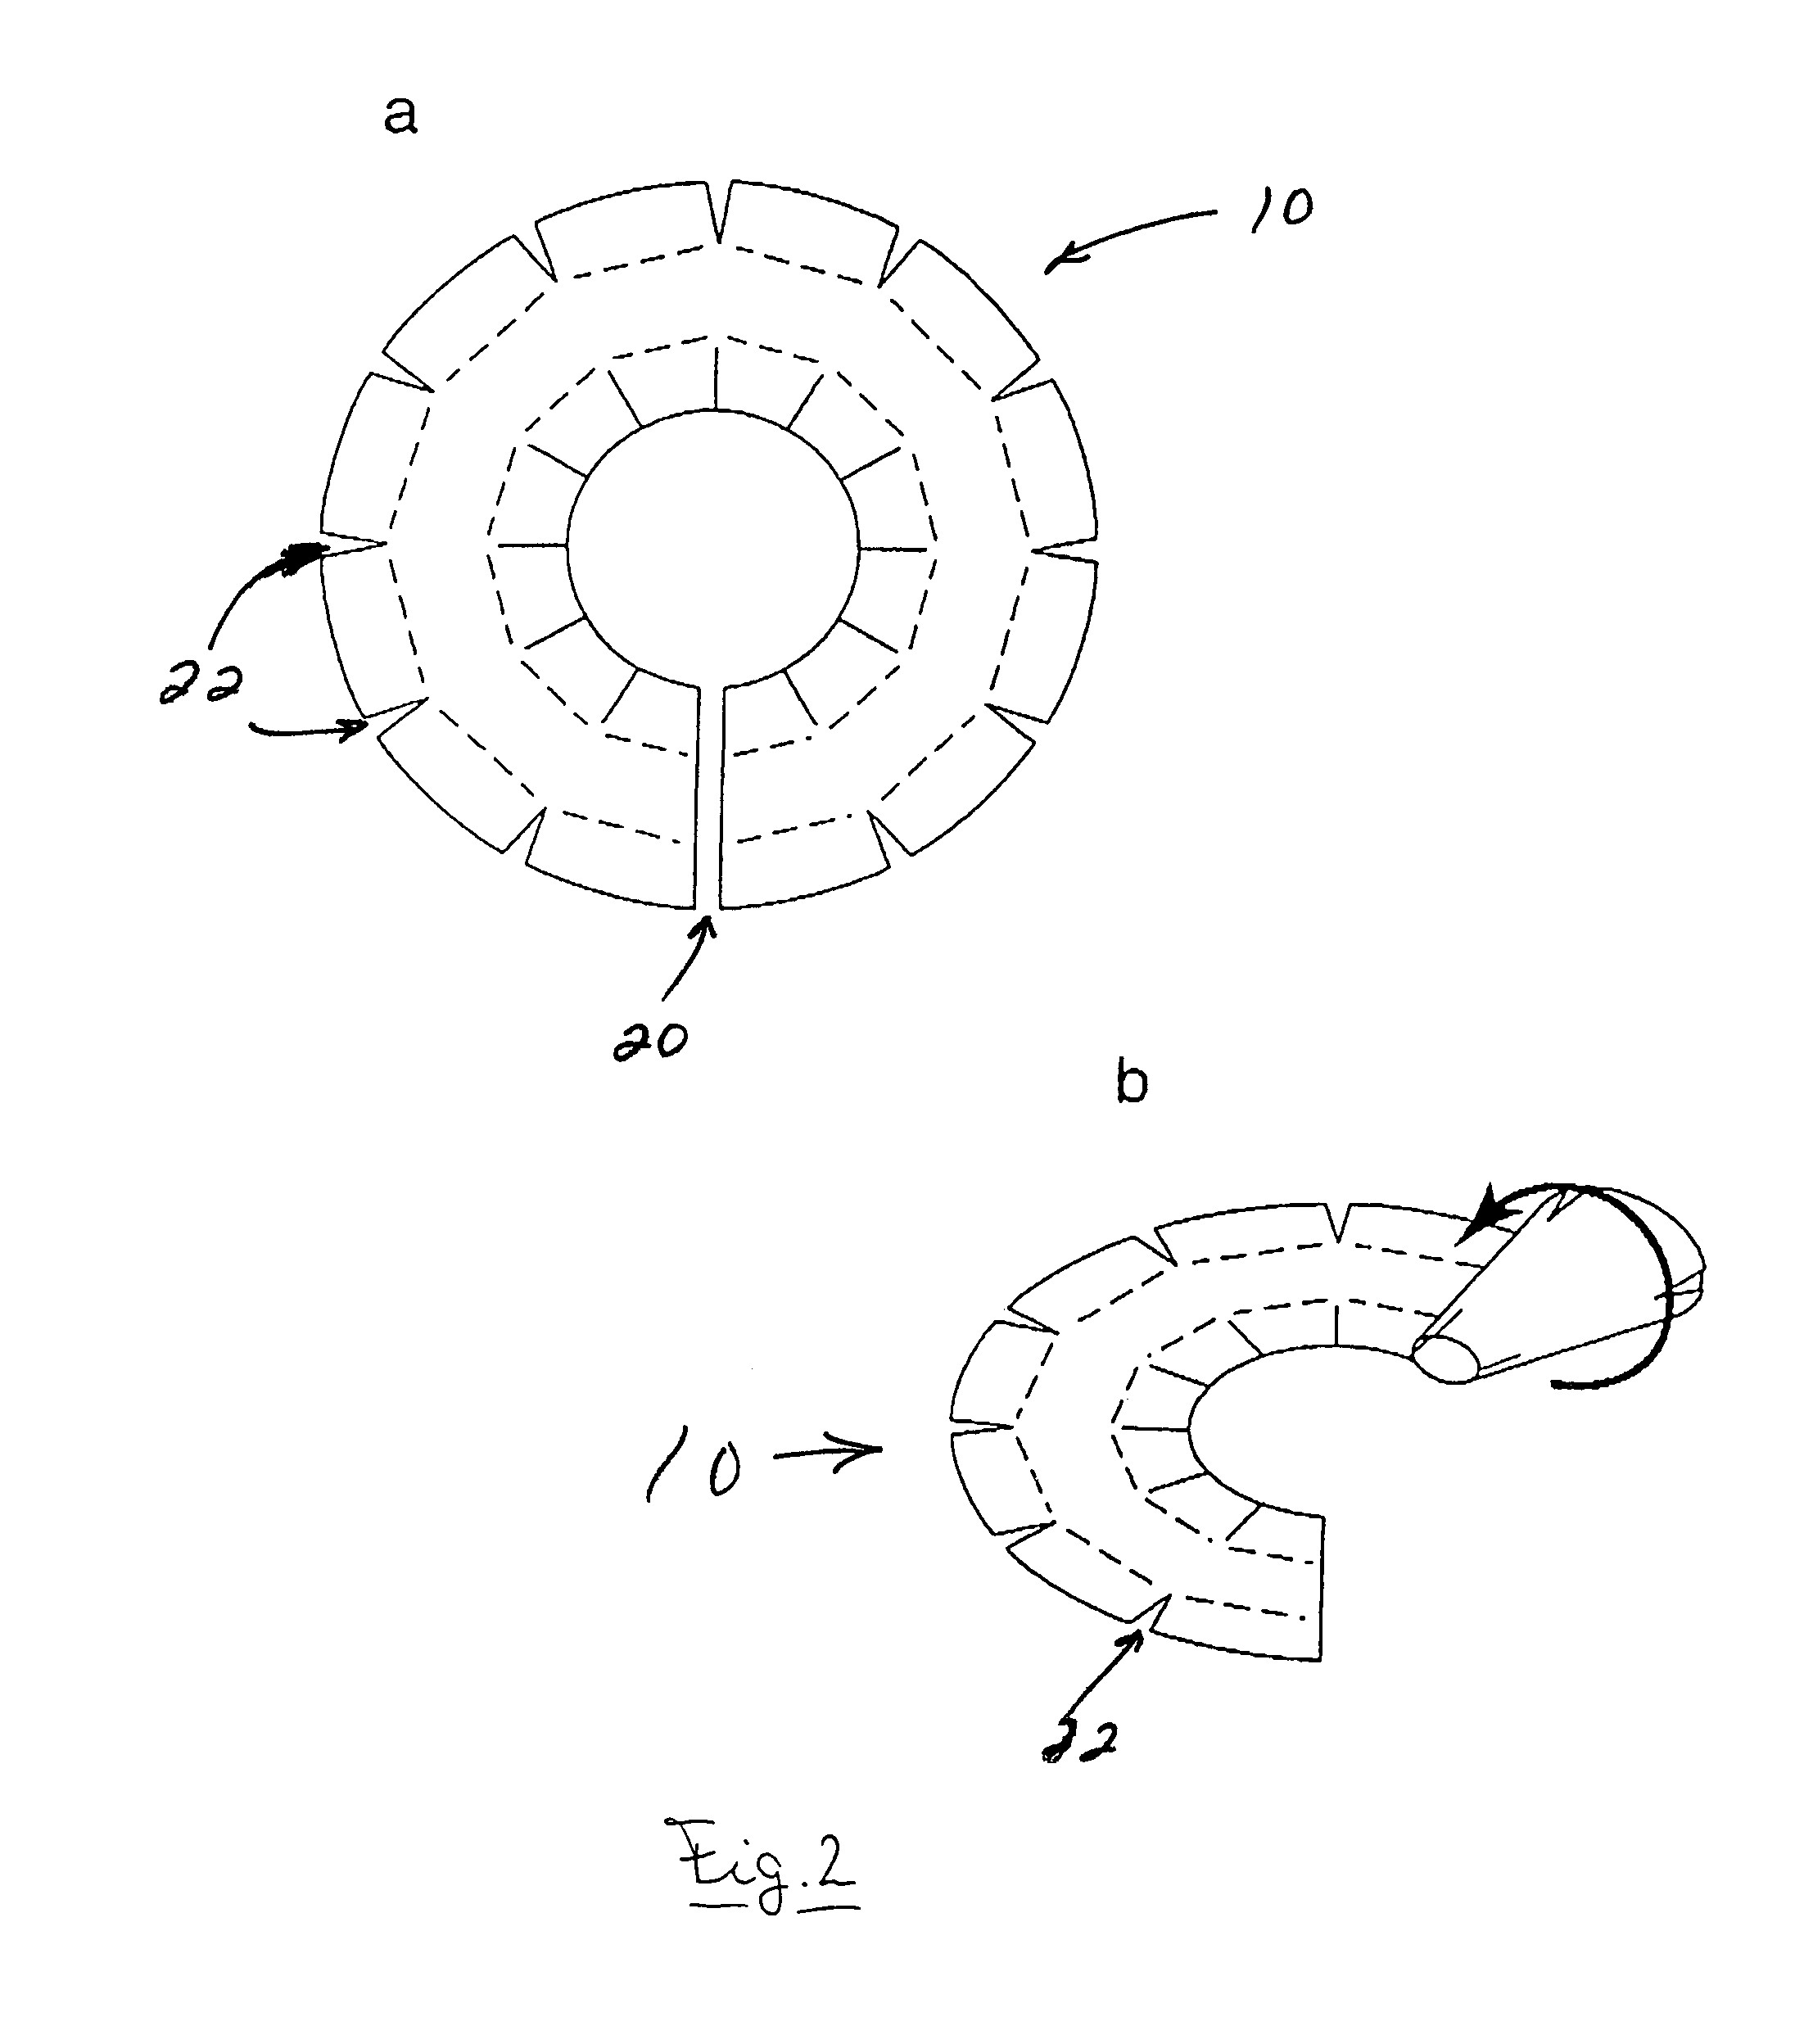 Microcontact structure for neuroprostheses for implantation on nerve tissue and method therefor